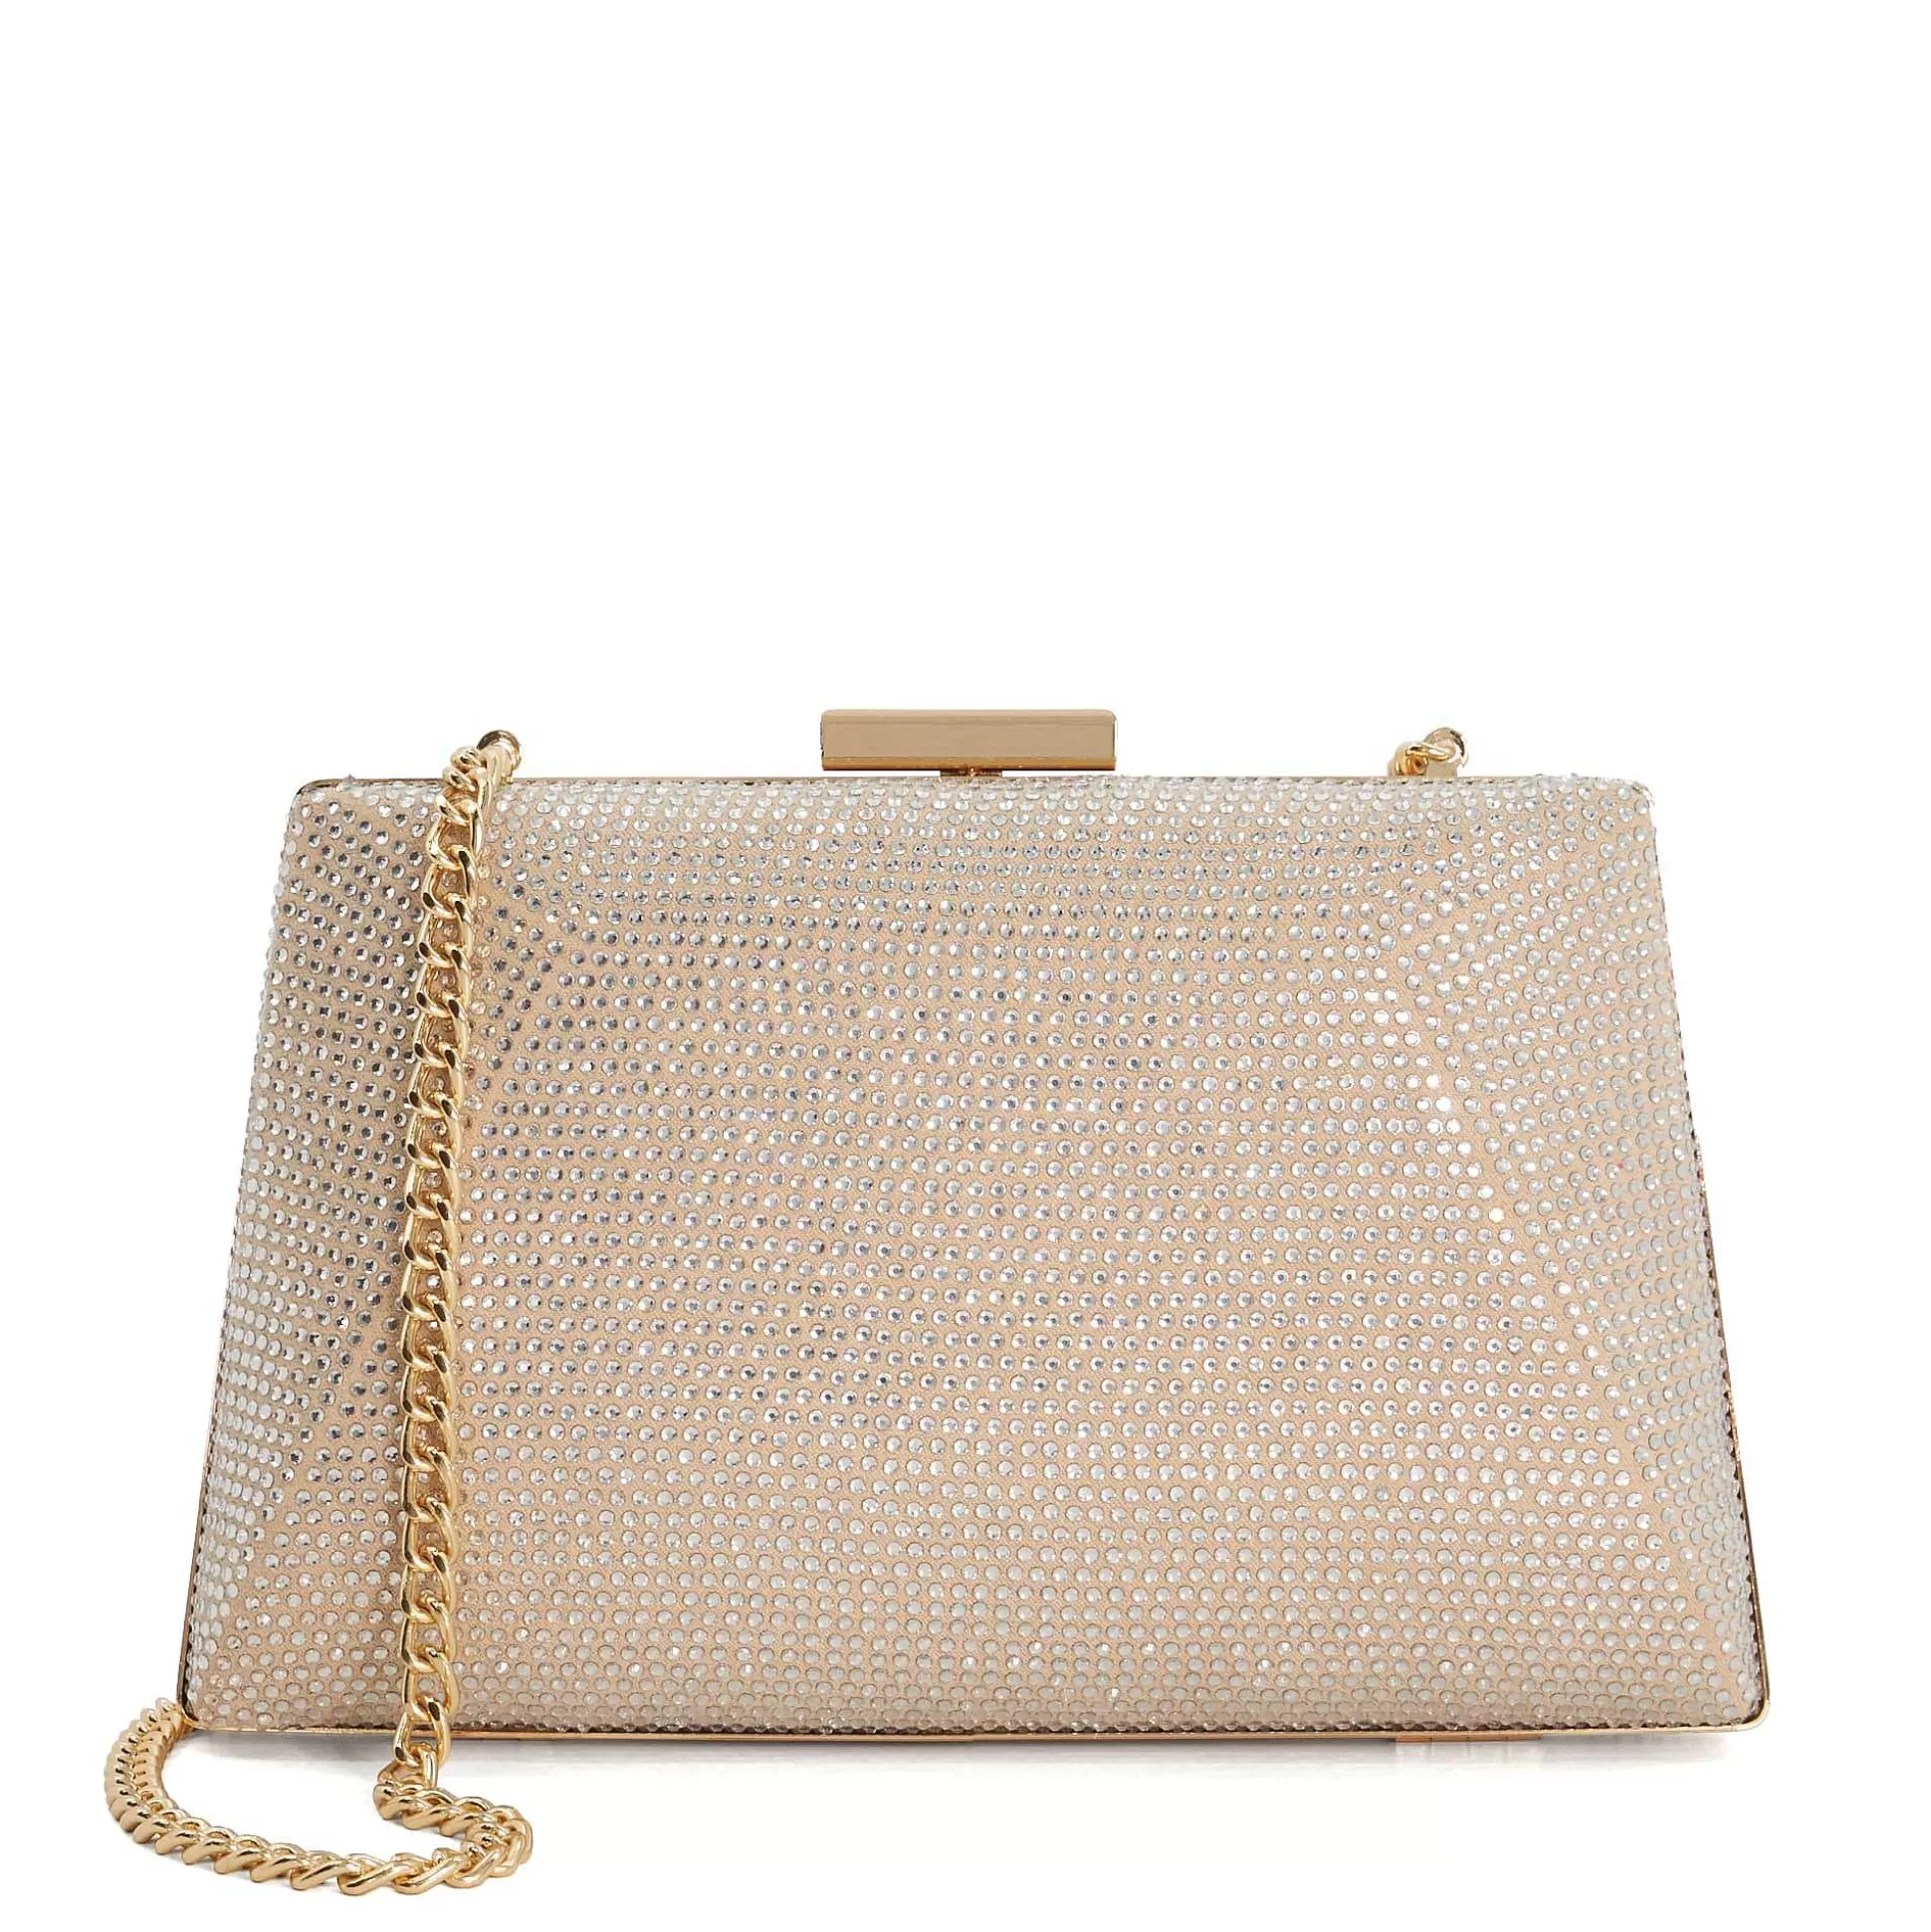 Dune London BELLAIRE - GOLD- Gifts | Clutch Bags